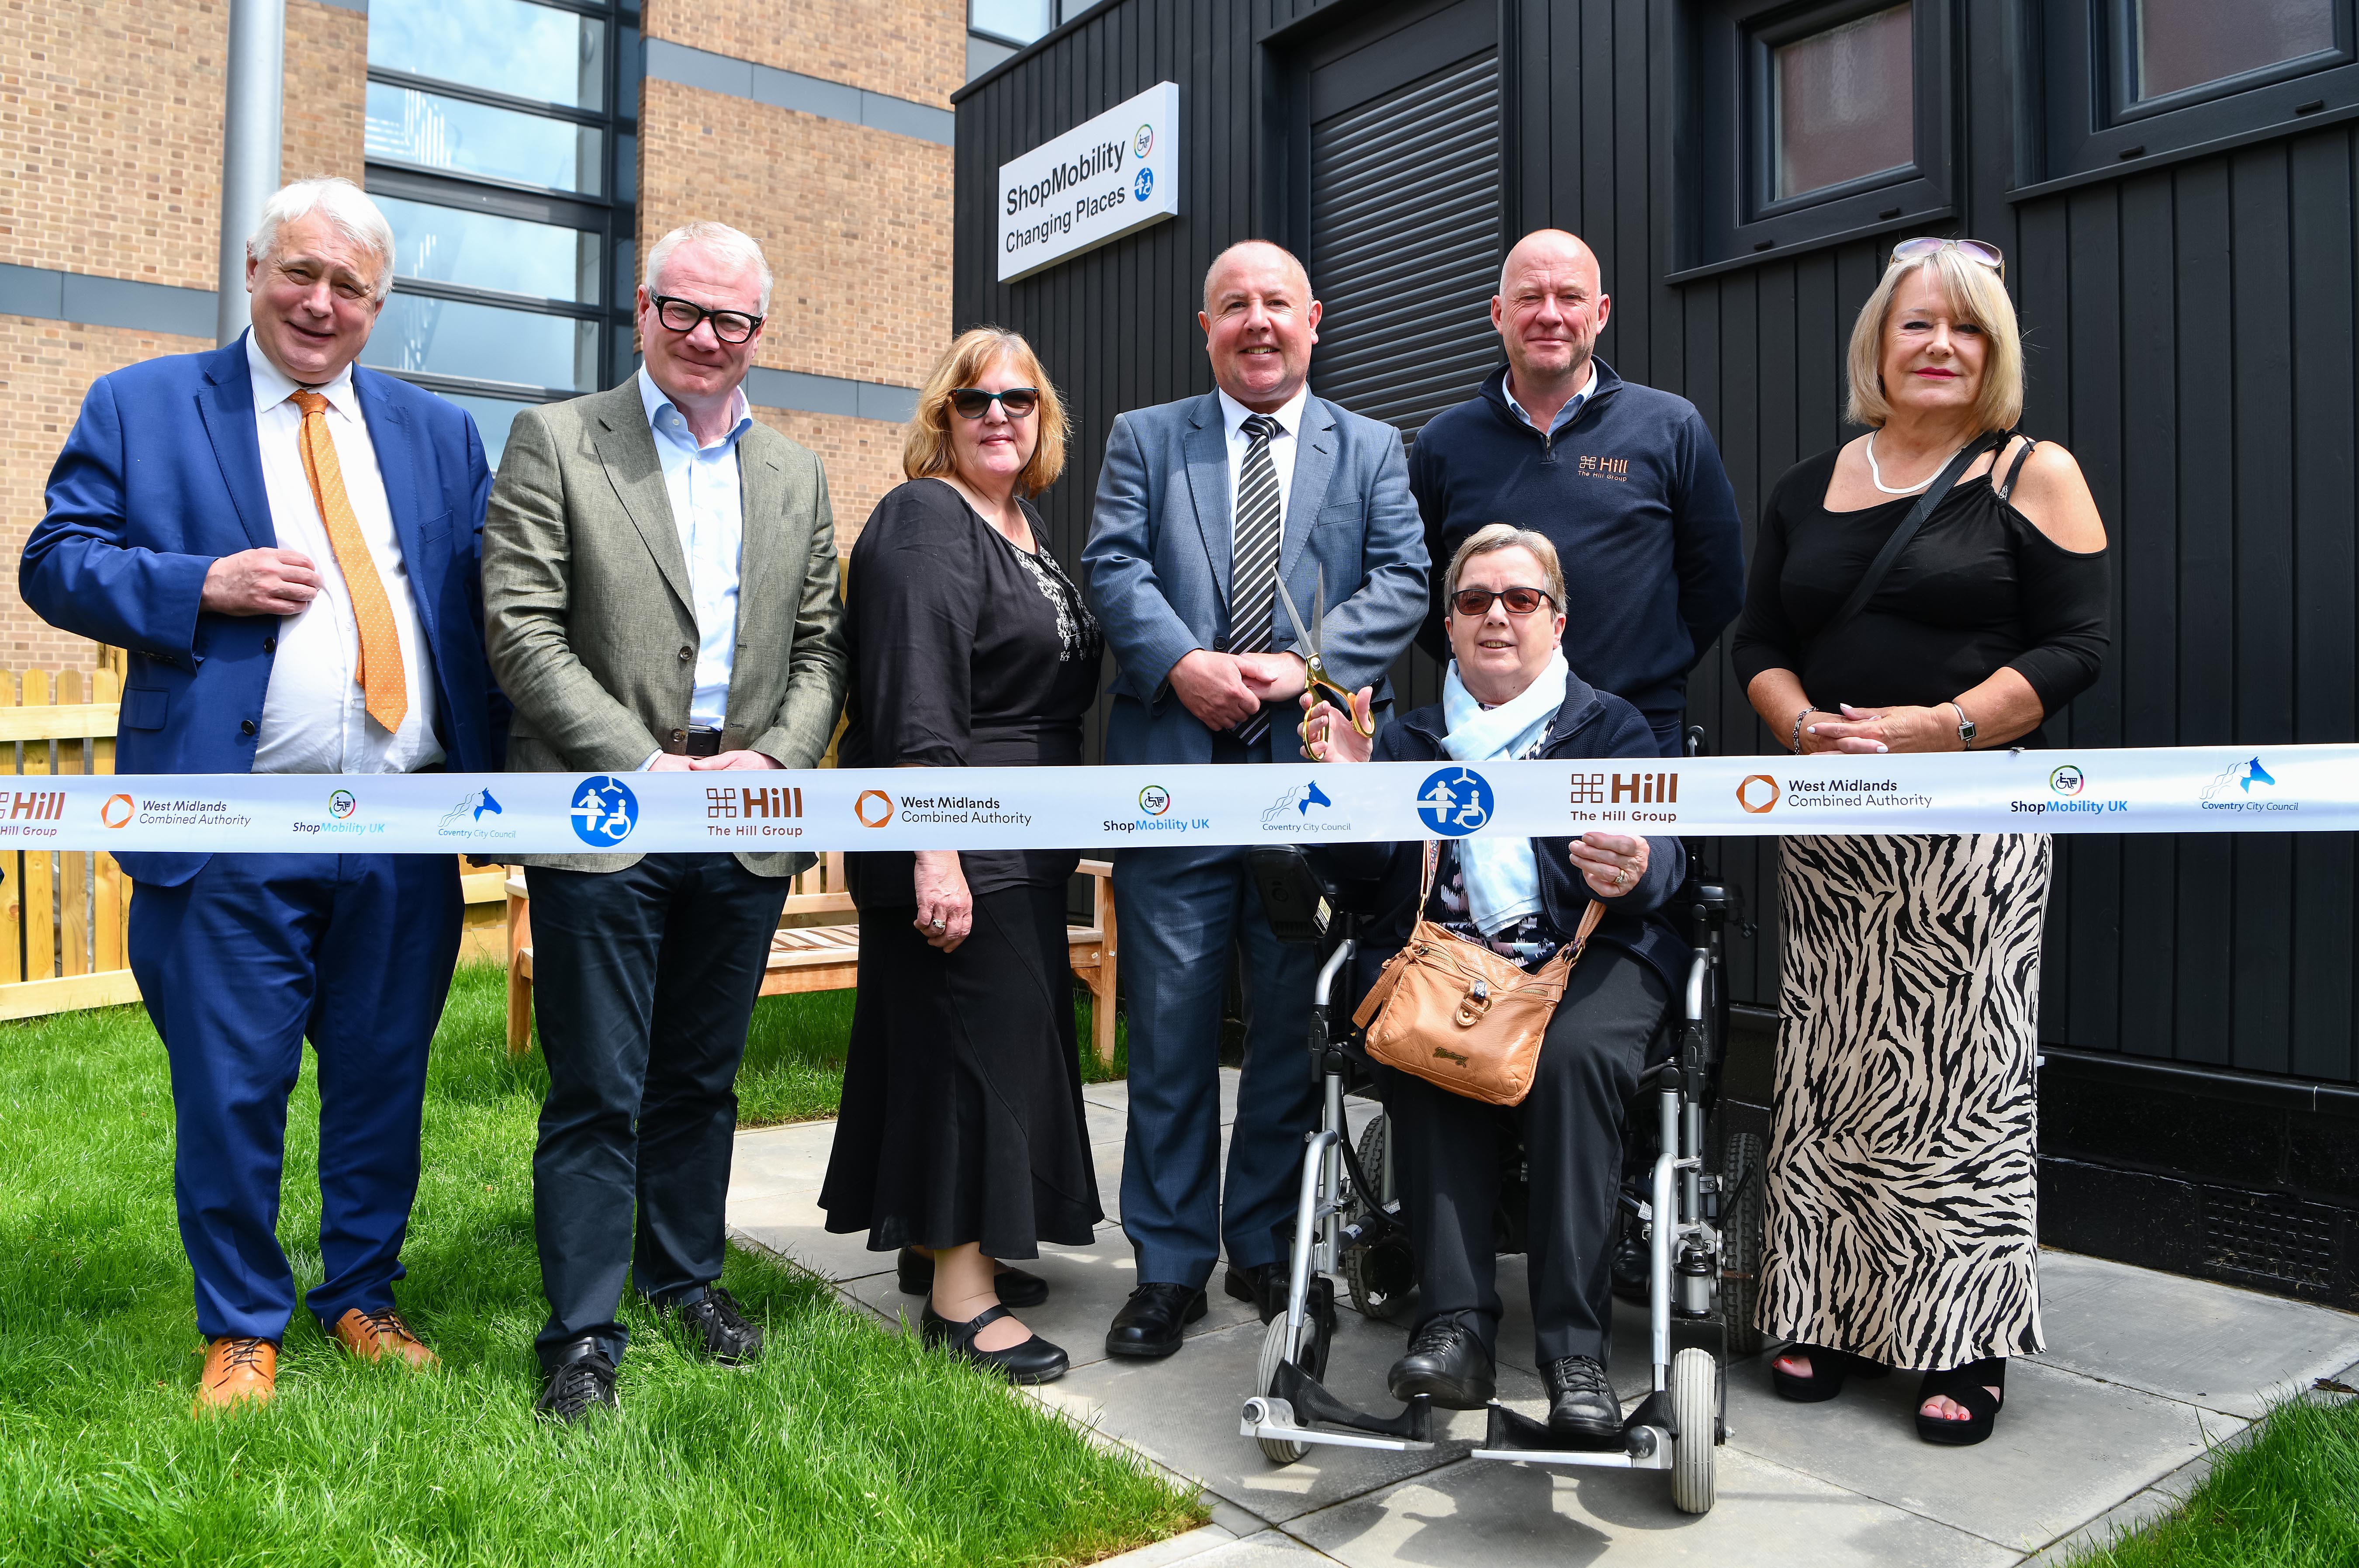 Cllr George Duggins; Richard Parker, Mayor of the West Midlands; manager of ShopMobility Jo Sanders; Cllr Jim O'Boyle; Andy Fancy, managing director of The Hill Group; and Cllr Patricia Hetherton with Barbara Gibbs, a regular user of ShopMobility, at the official opening of the new centre as part of the WMCA-funded City Centre South regeneration.